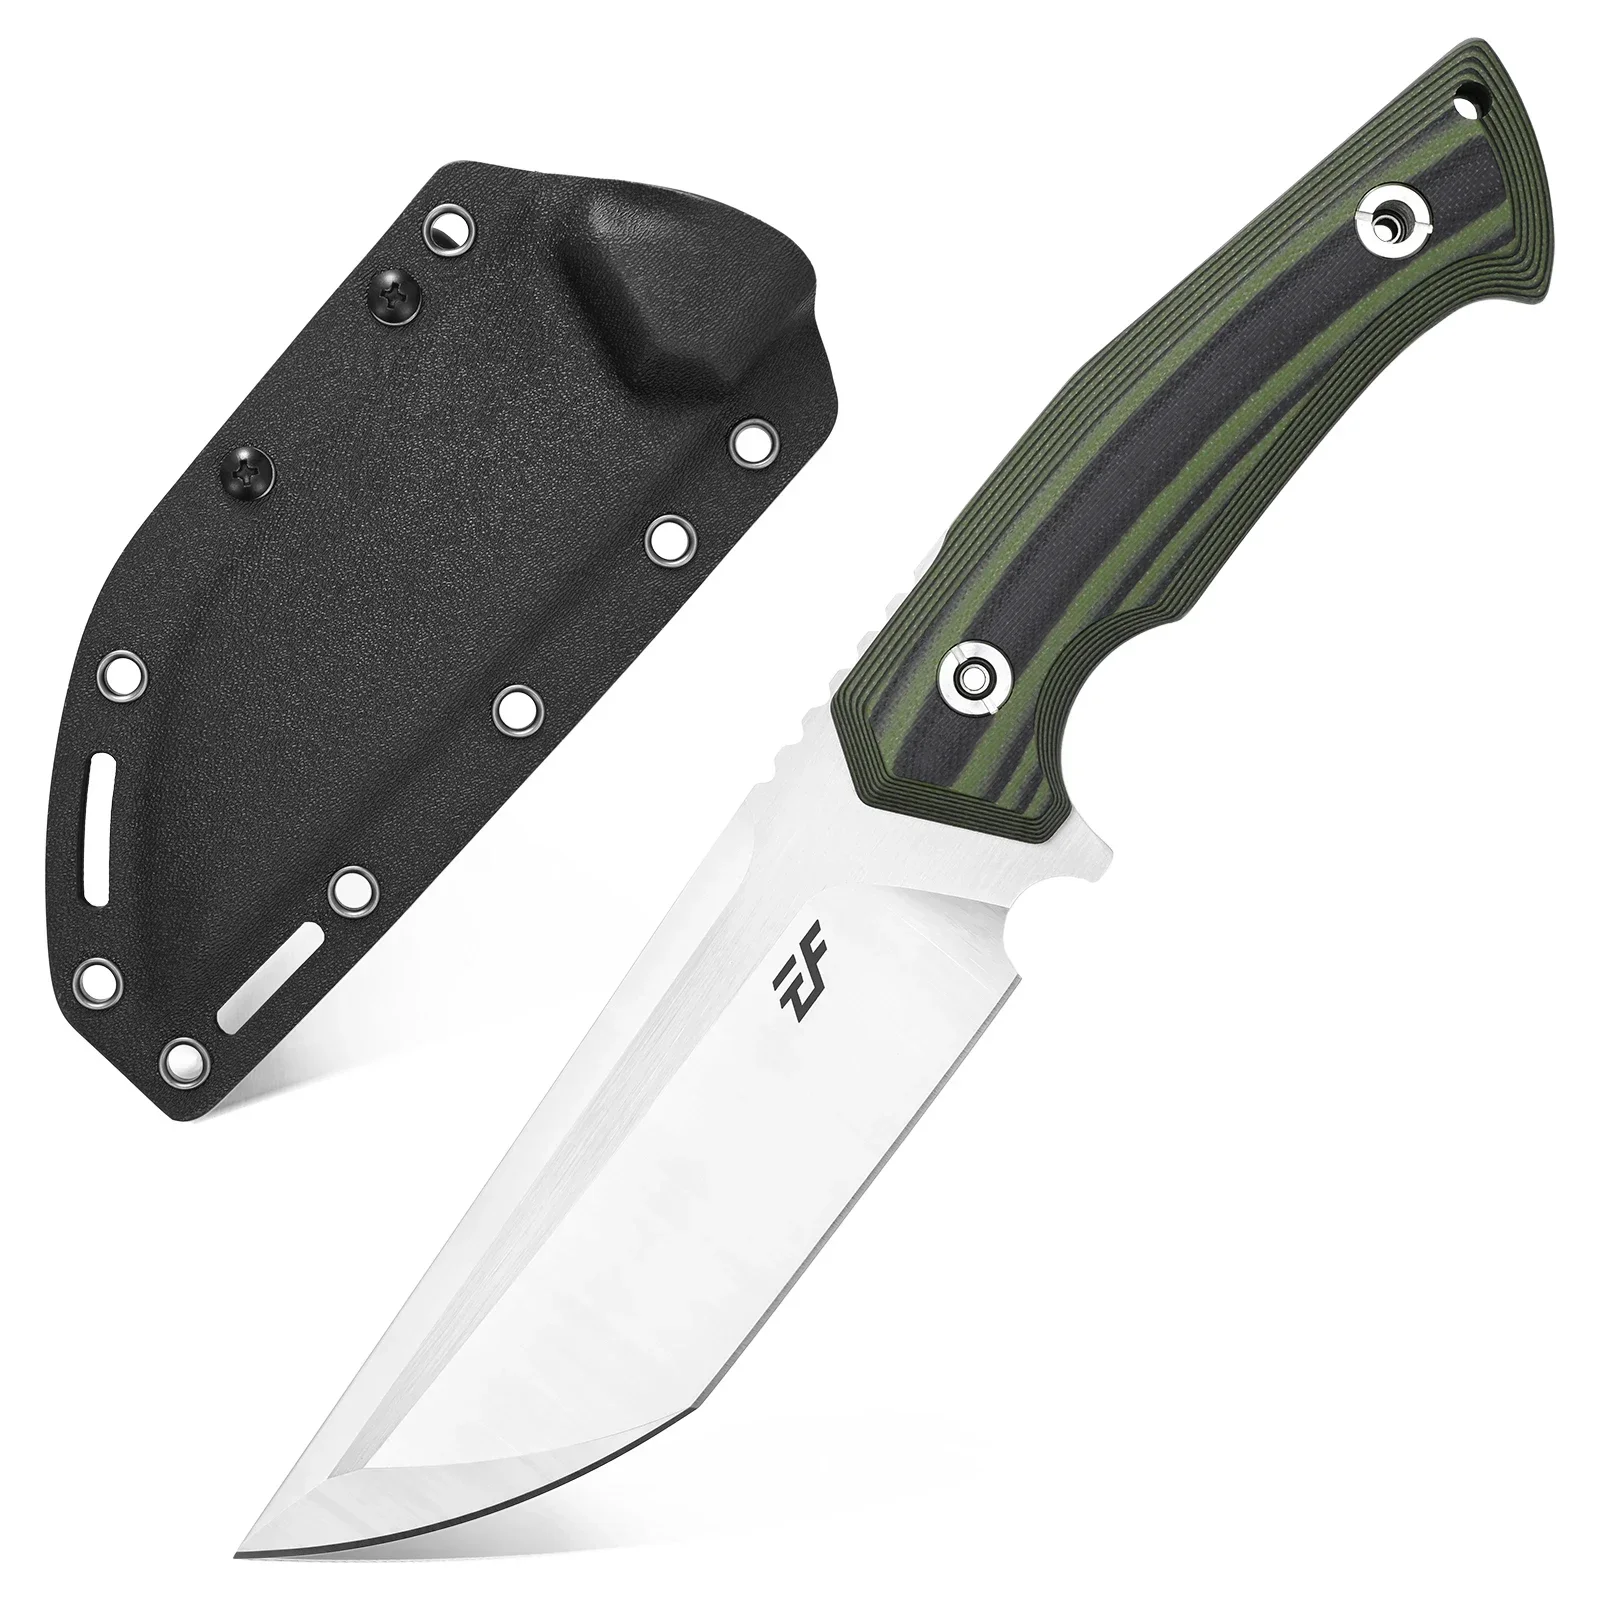 

Eafengrow EF134 Fixed Blade Knife, DC53 Steel Blade,G10 Handle Full Tang Heavy Duty EDC Straight Knifes for Working Camping